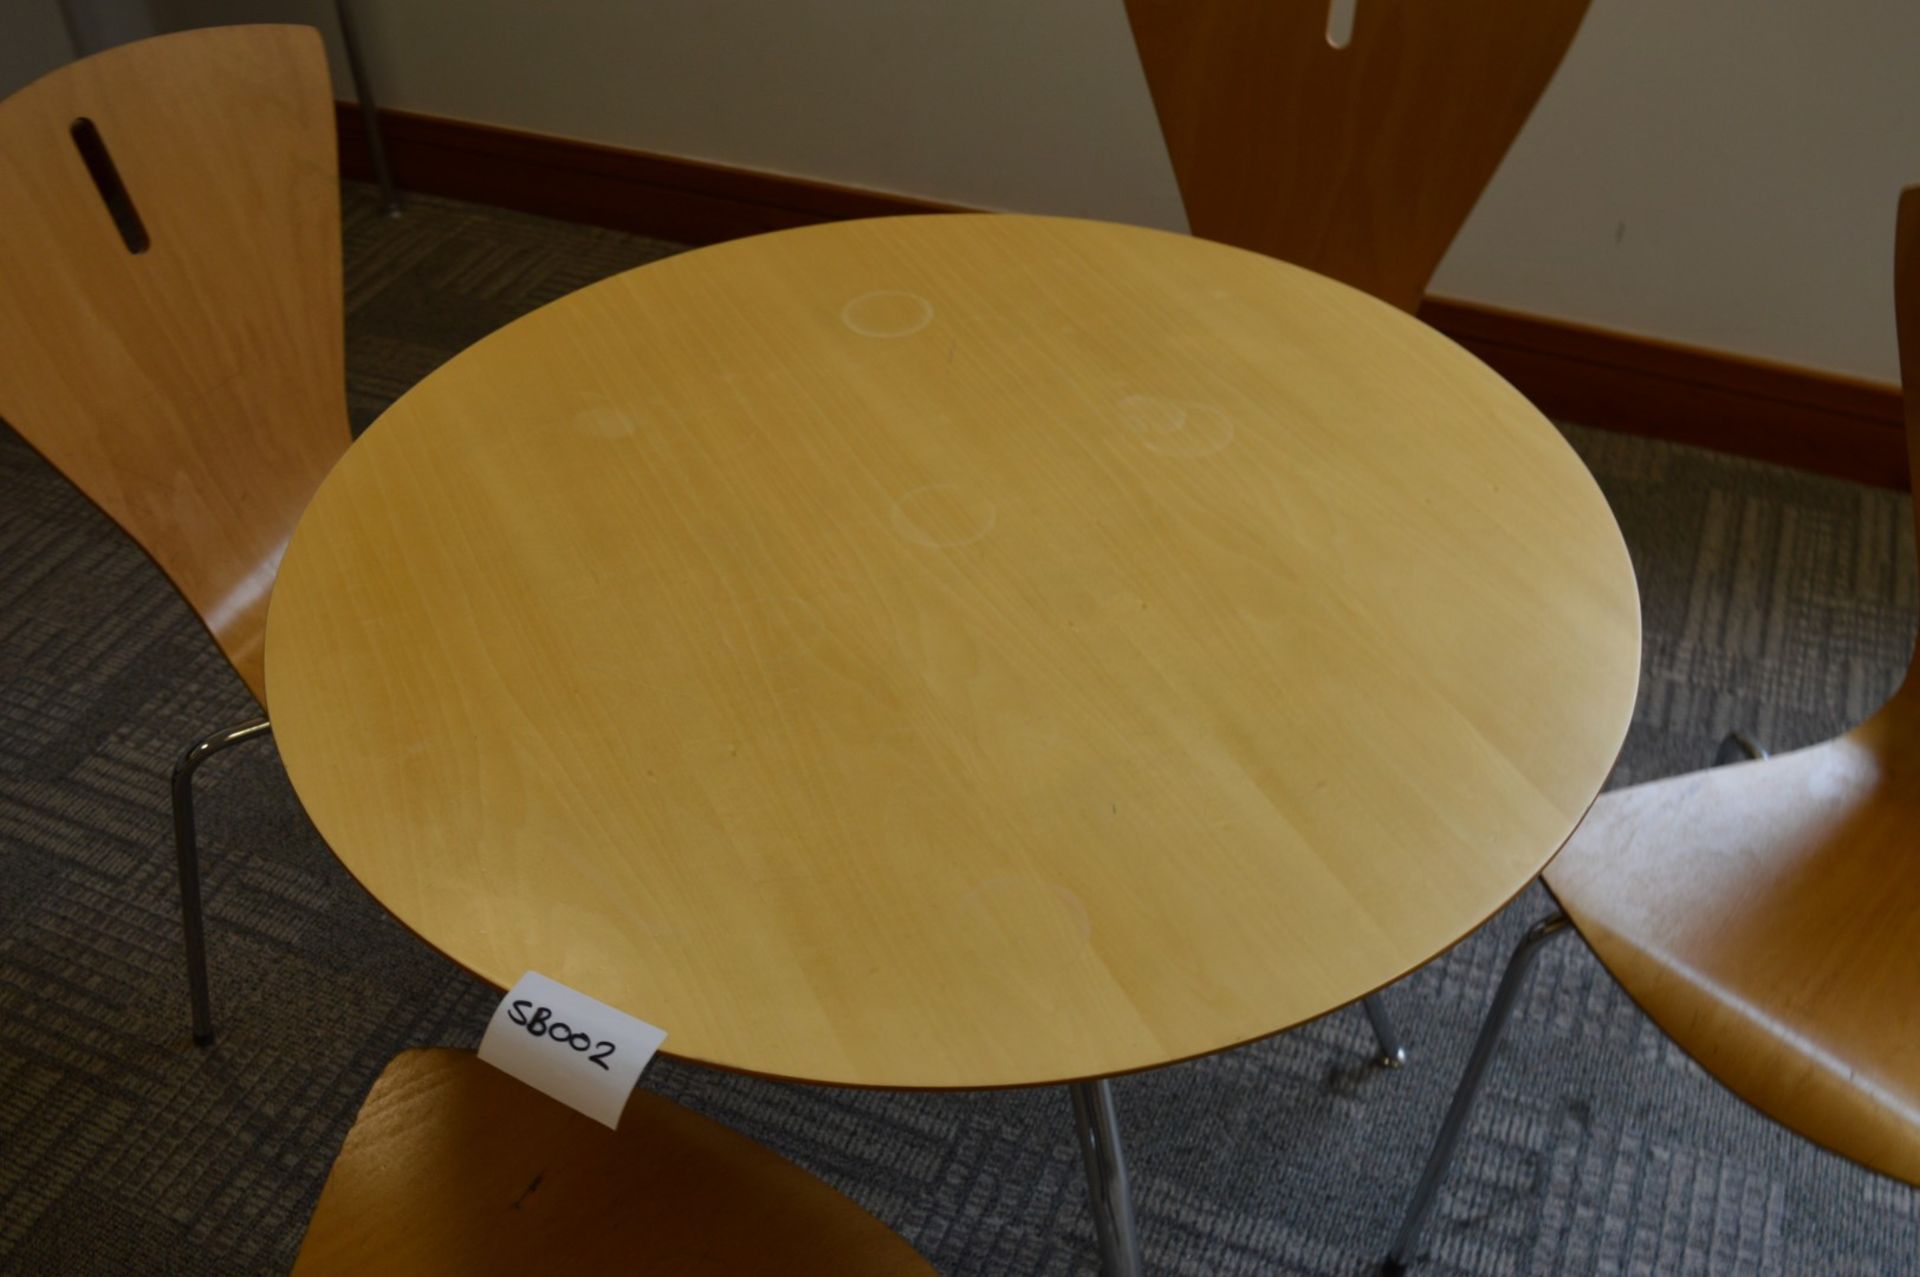 1 x Staff Room Table With Four Matching Chairs - Beech Finish - Contemporay Design - Ref SB002 - - Image 3 of 3